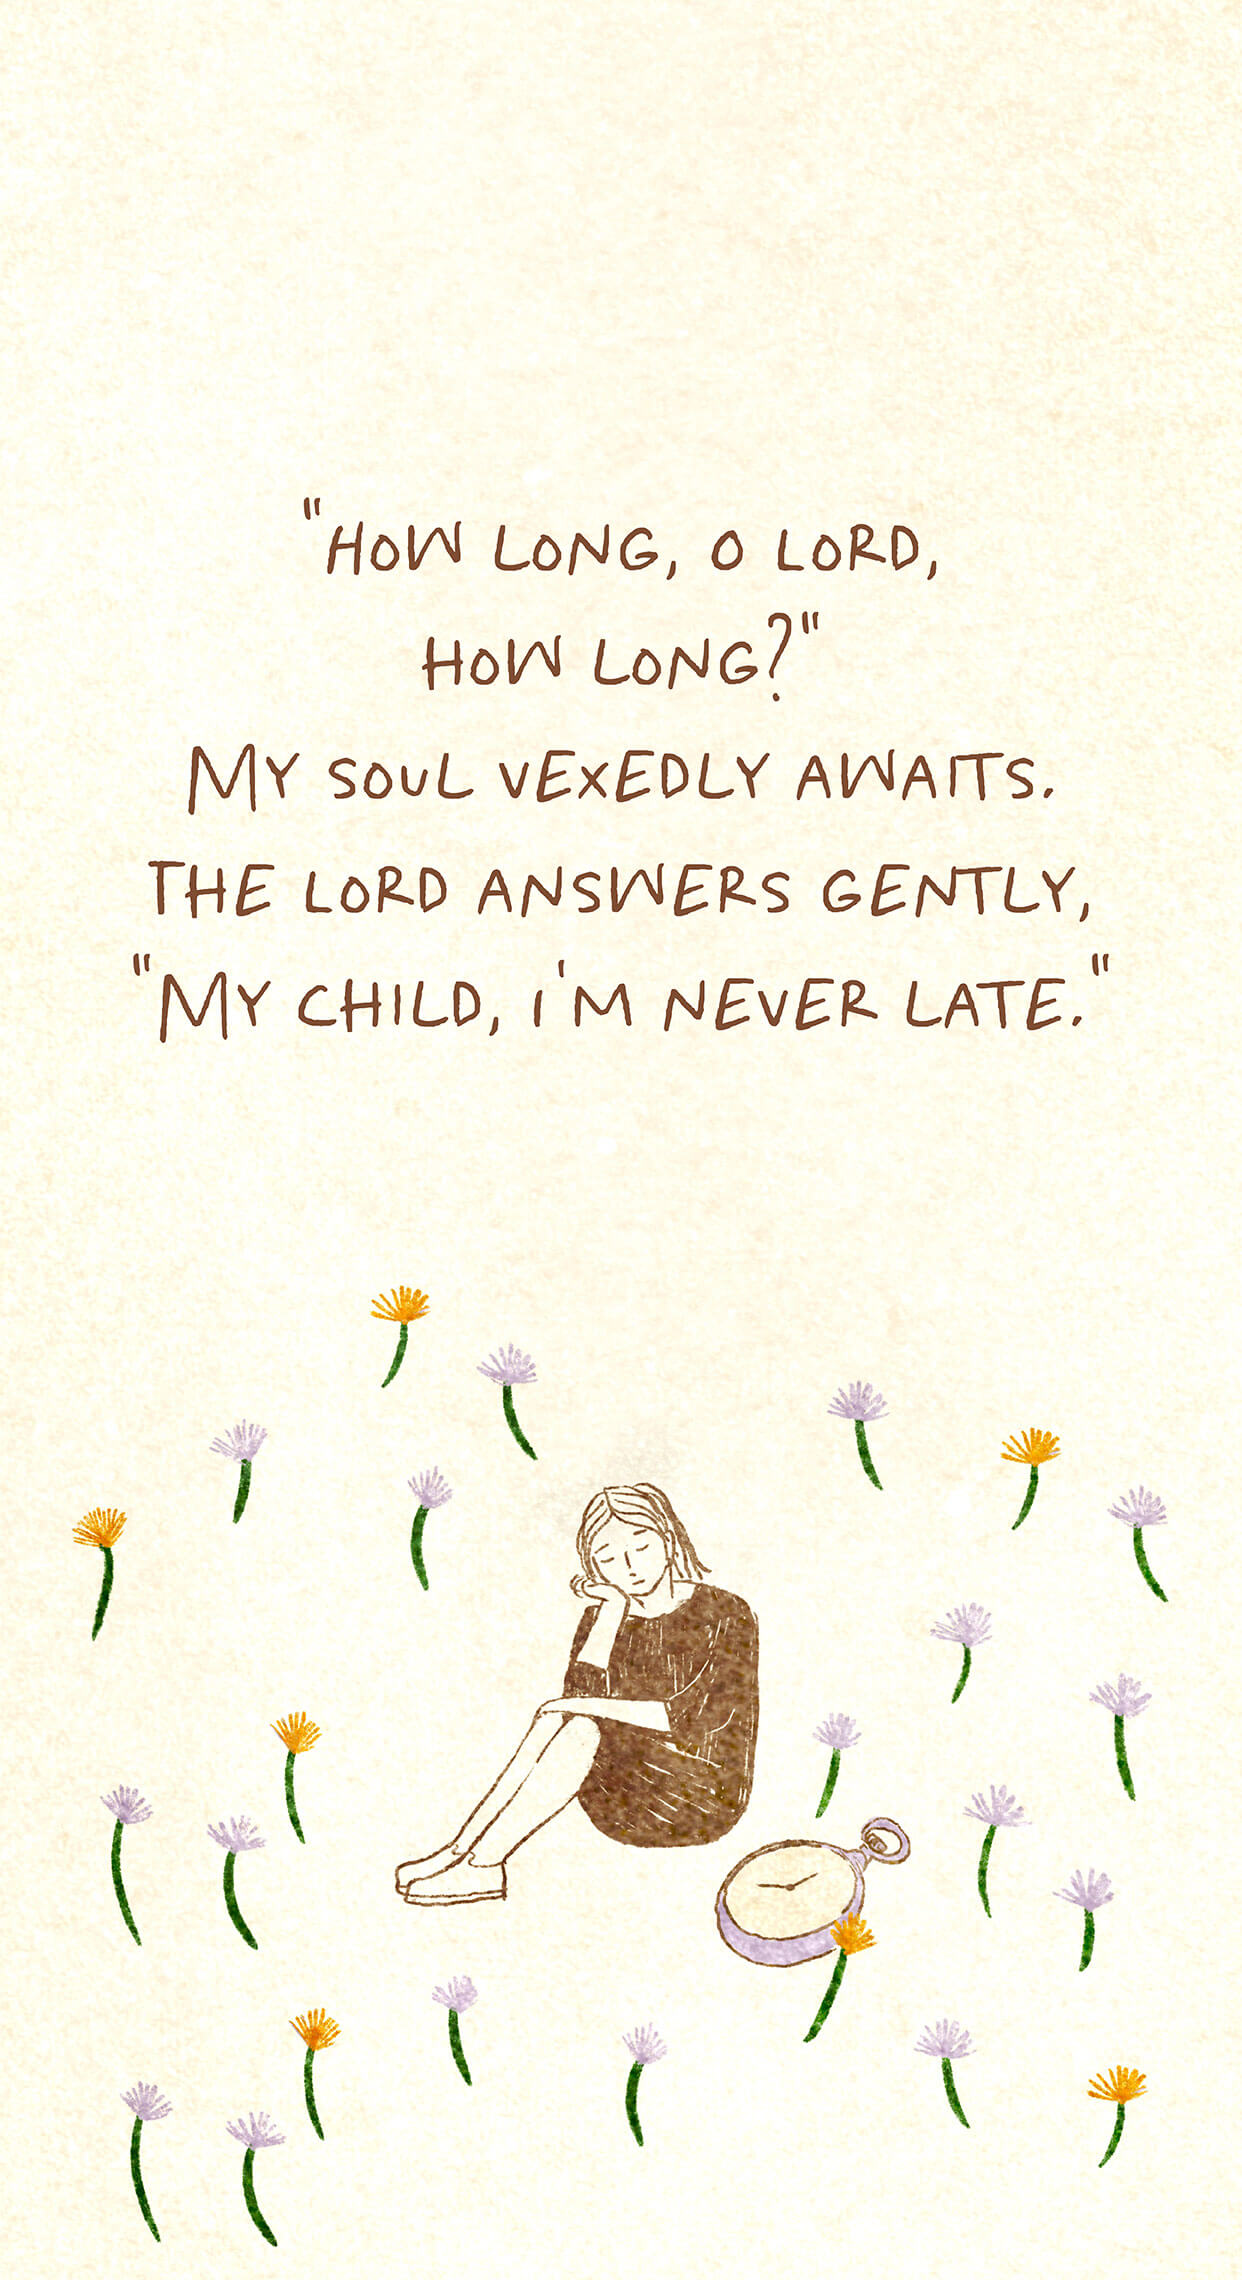 "How long, O Lord, how long?" My soul vexedly awaits. The Lord answers gently, "My child, I'm never late."